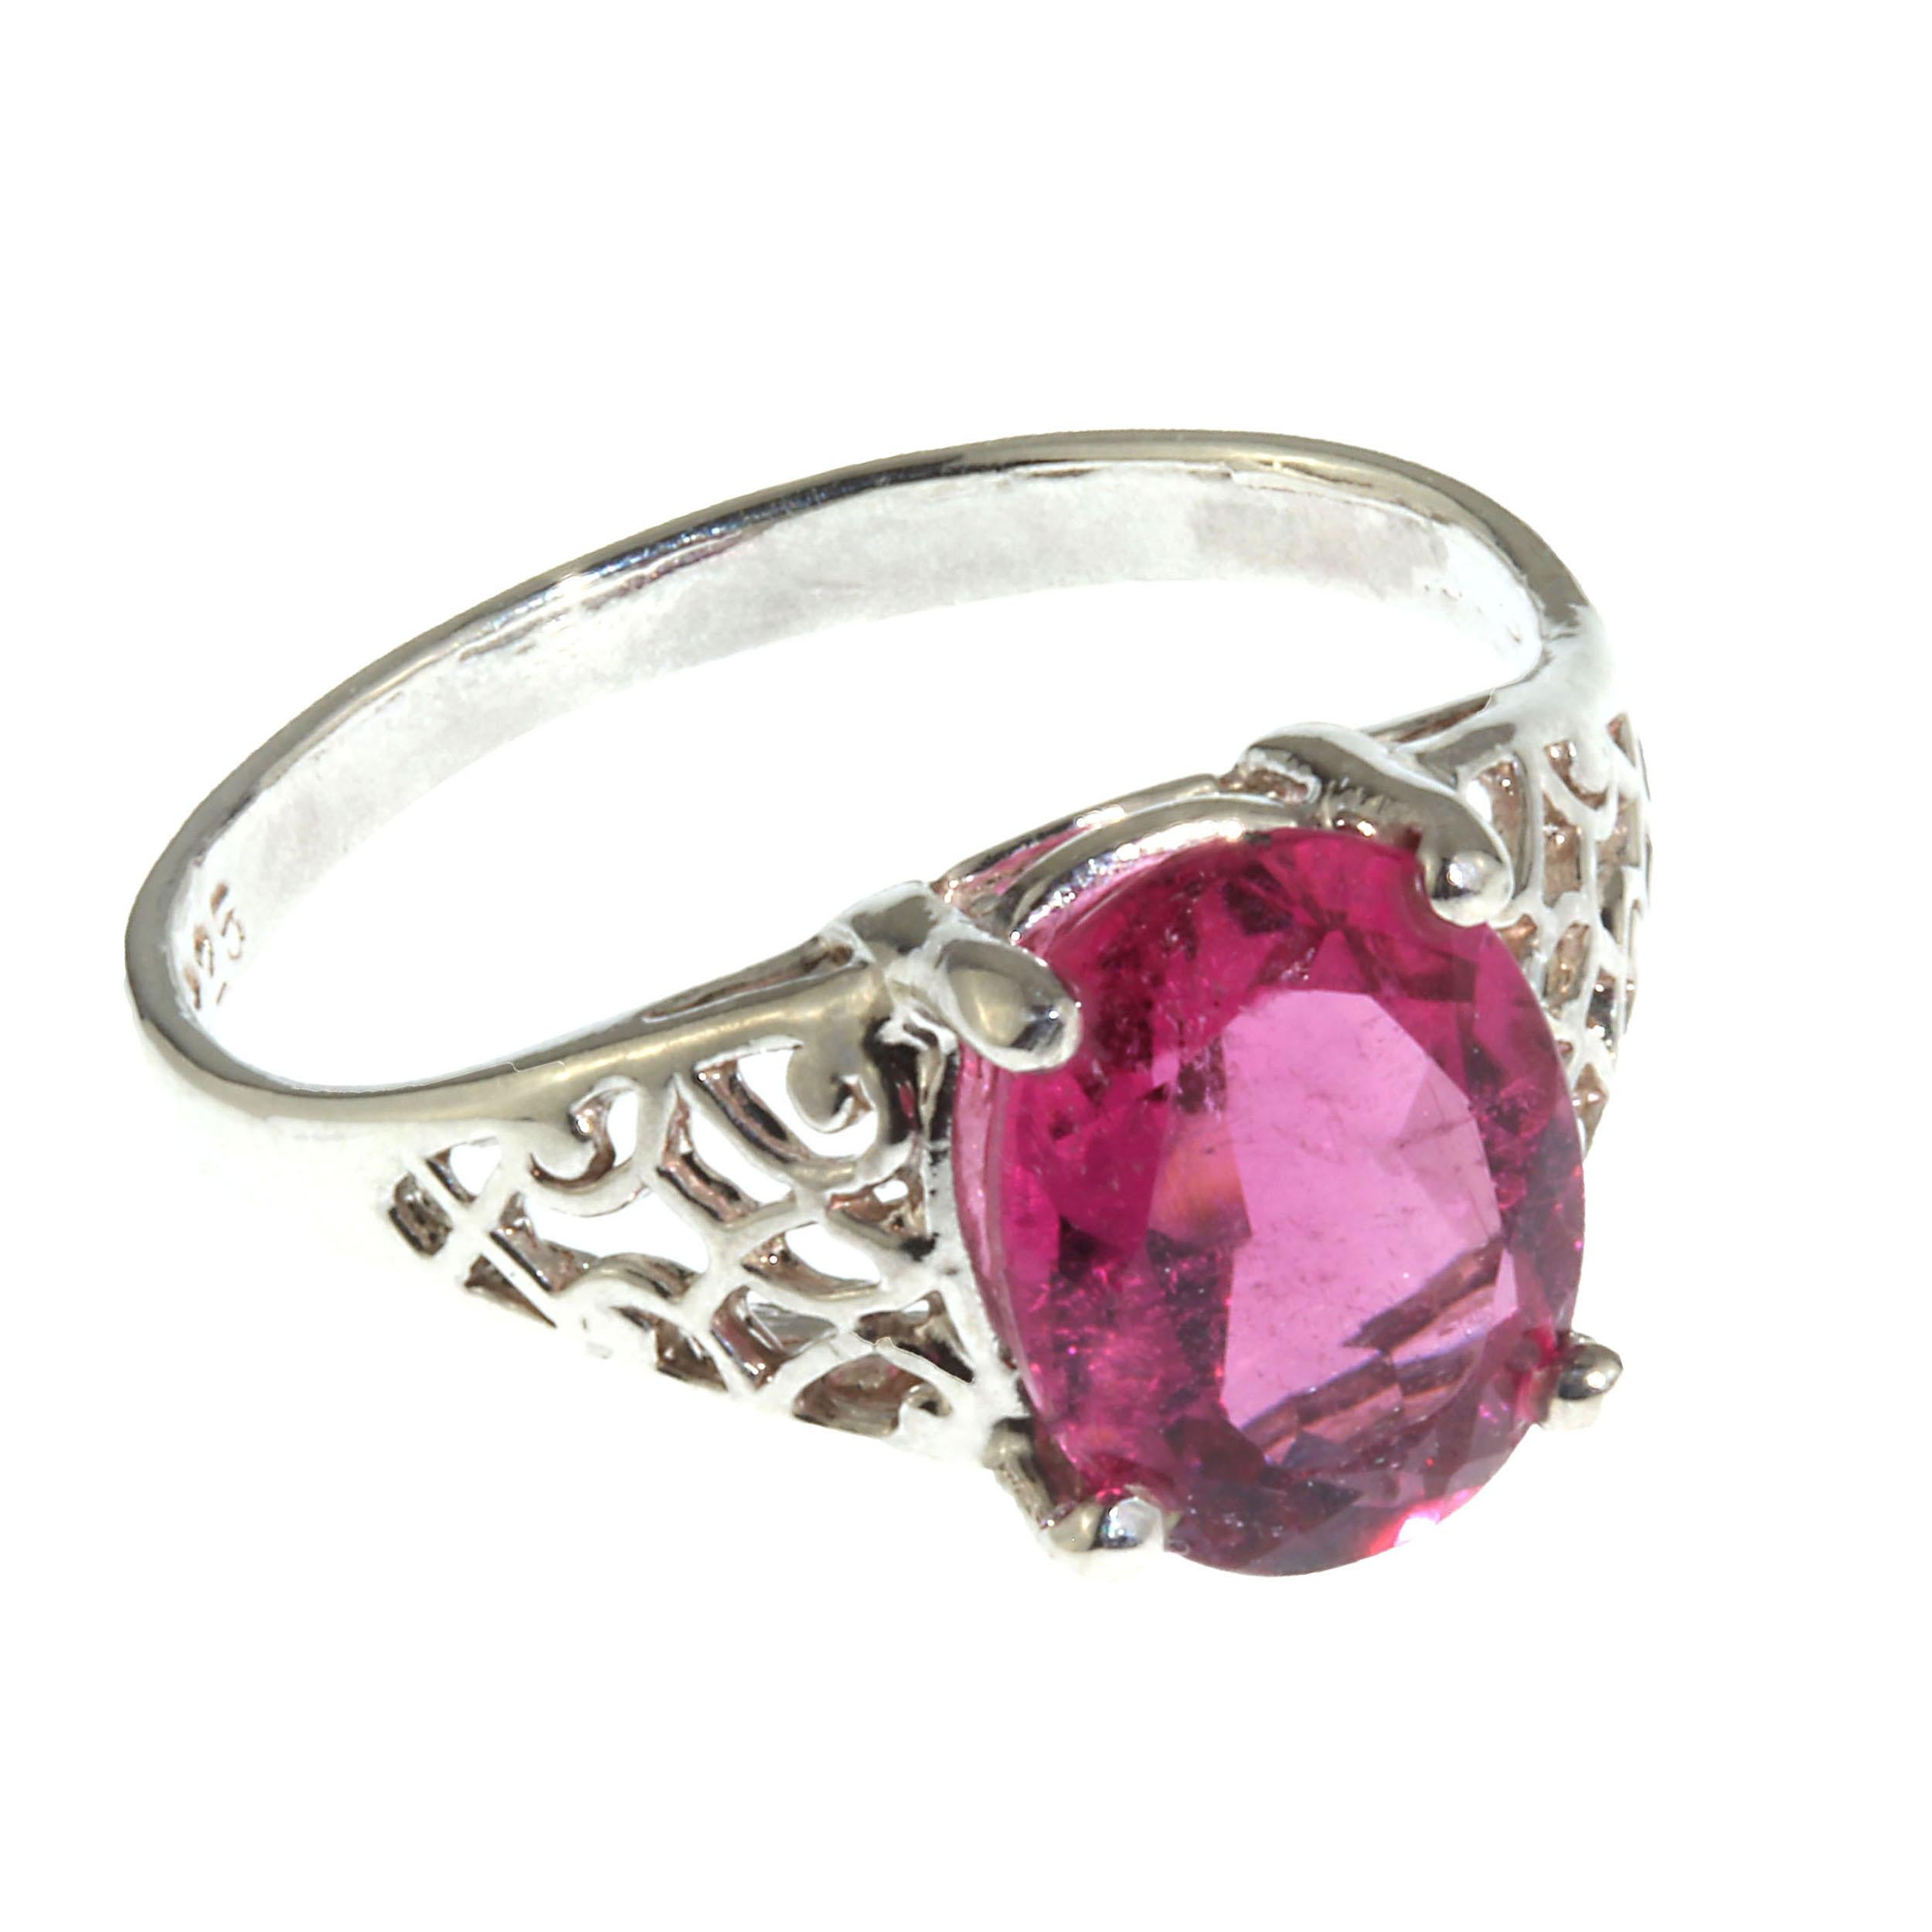 Custom made sterling Silver Ring featuring a sparkling oval Rubelite. This is a lovely bright pink Rubelite with some of the delightful natural inclusions that are usual in these types of tourmalines. Delicate open work detail in the setting